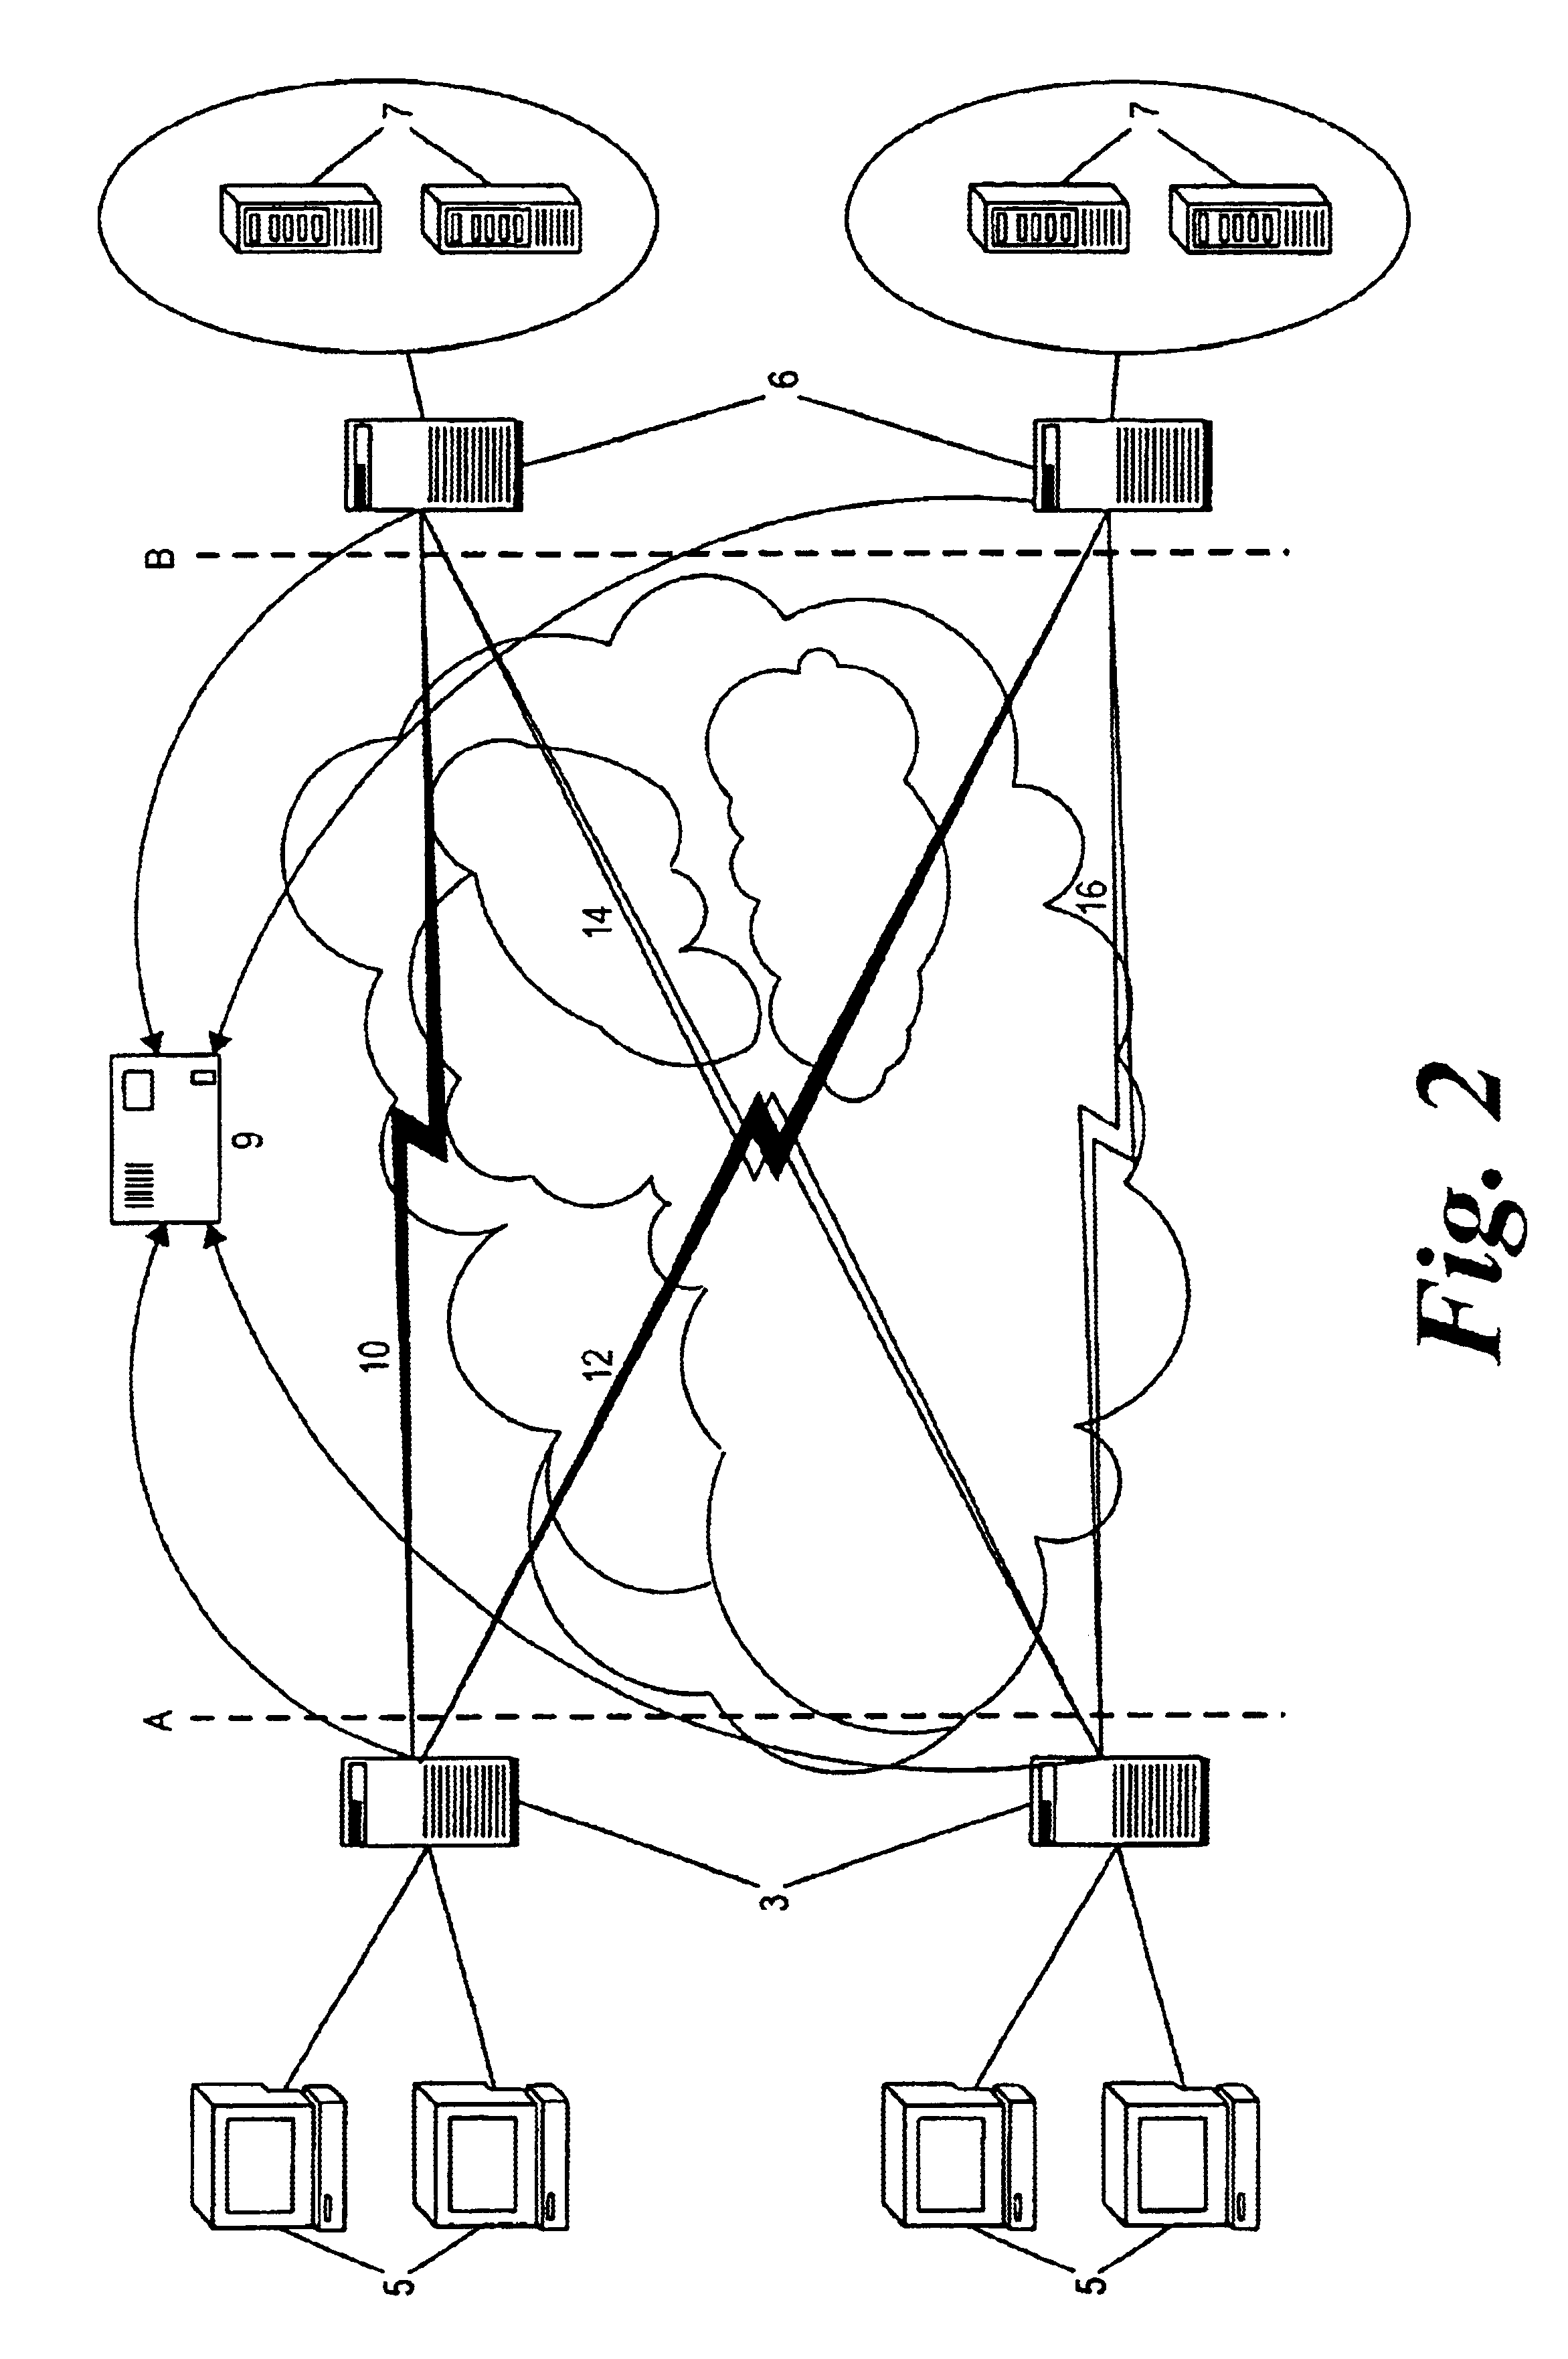 Method and apparatus for optimizing network service